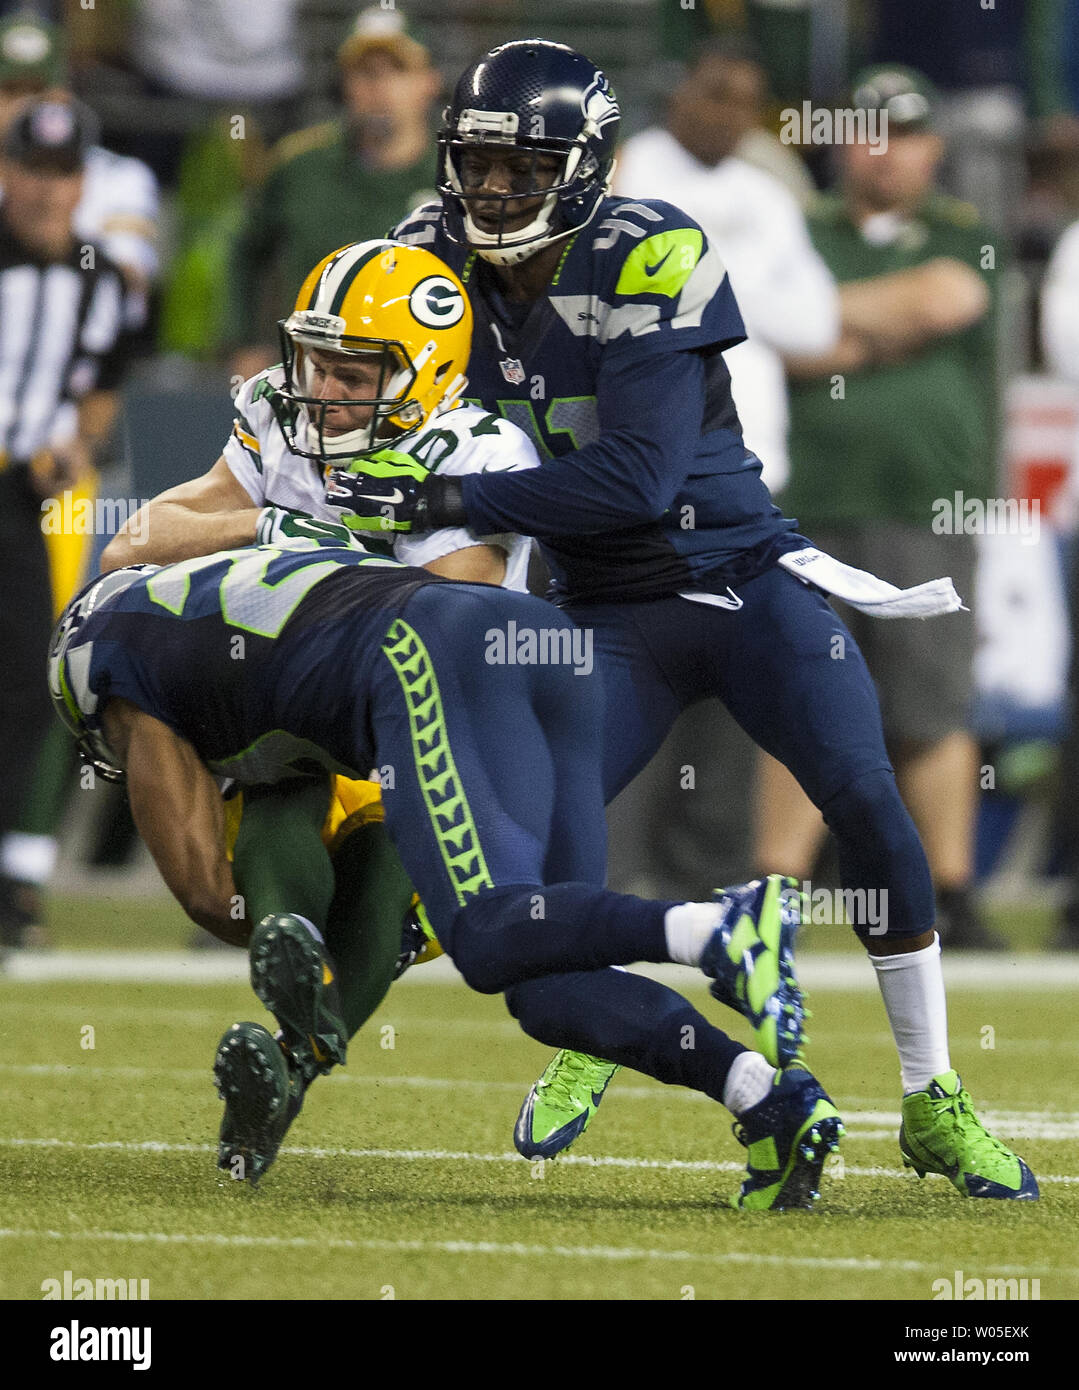 Seattle Seahawks defensive backs Richard Thomas (25) and Byron Maxwell tackle Green Bay Packers wide receiver Jordy nelson (87) during the third quarter of the NFL Kickoff held at CenturyLink Field September 4, 2014 in Seattle. The Seahawks beat the Packers 36-16.   UPI/Jim Bryant Stock Photo